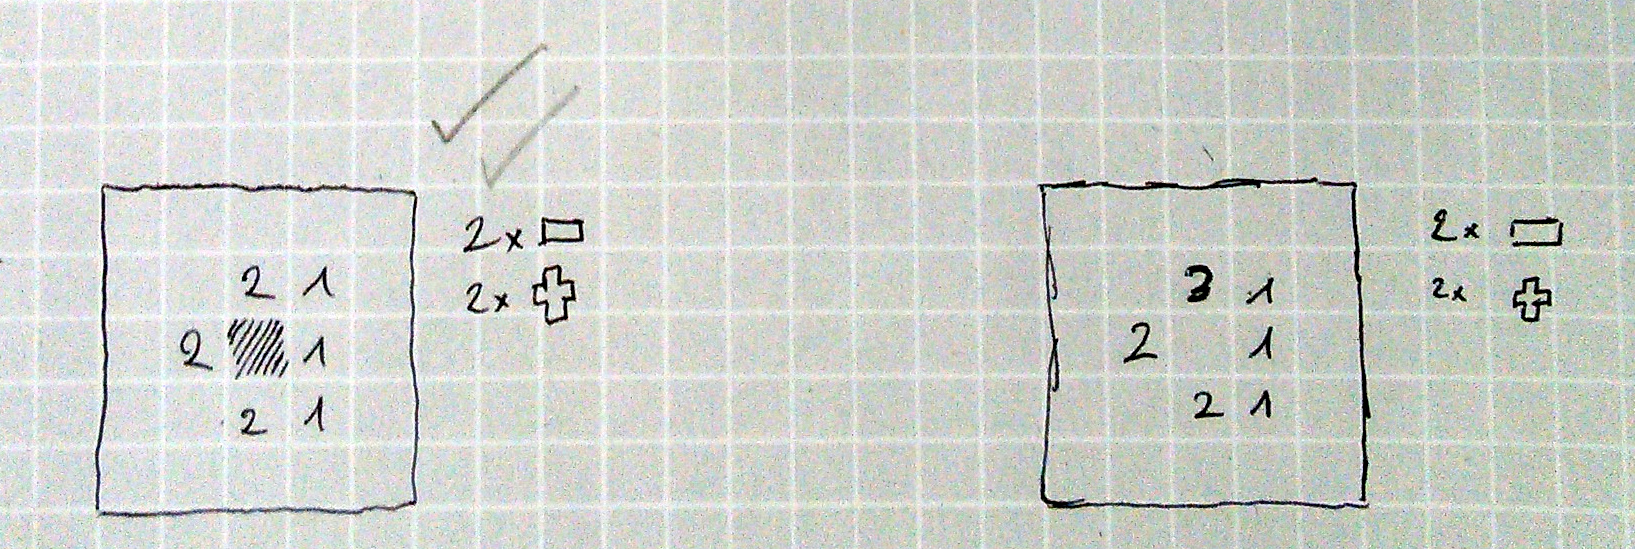 level sketches on paper